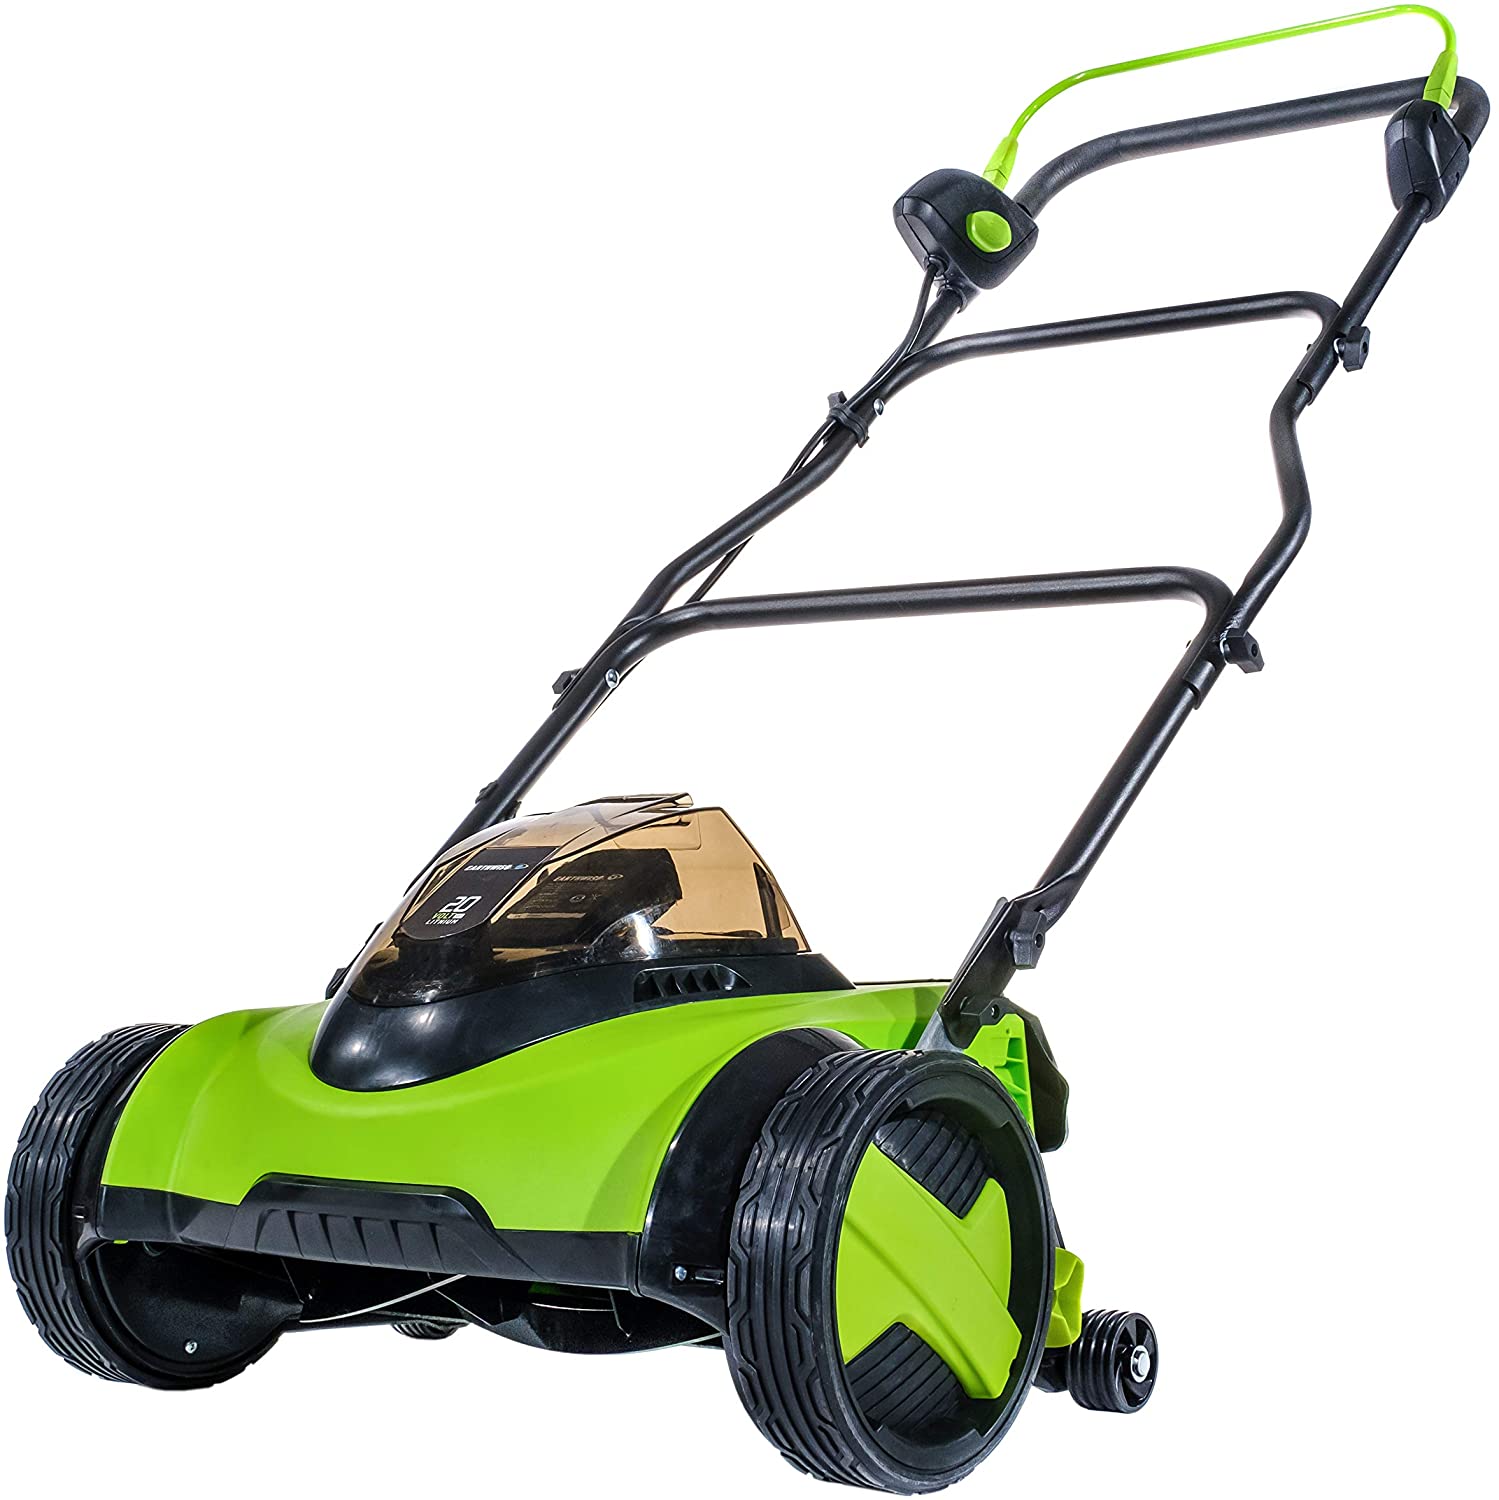 Save on Earthwise reel lawn mowers and electric pressure washers